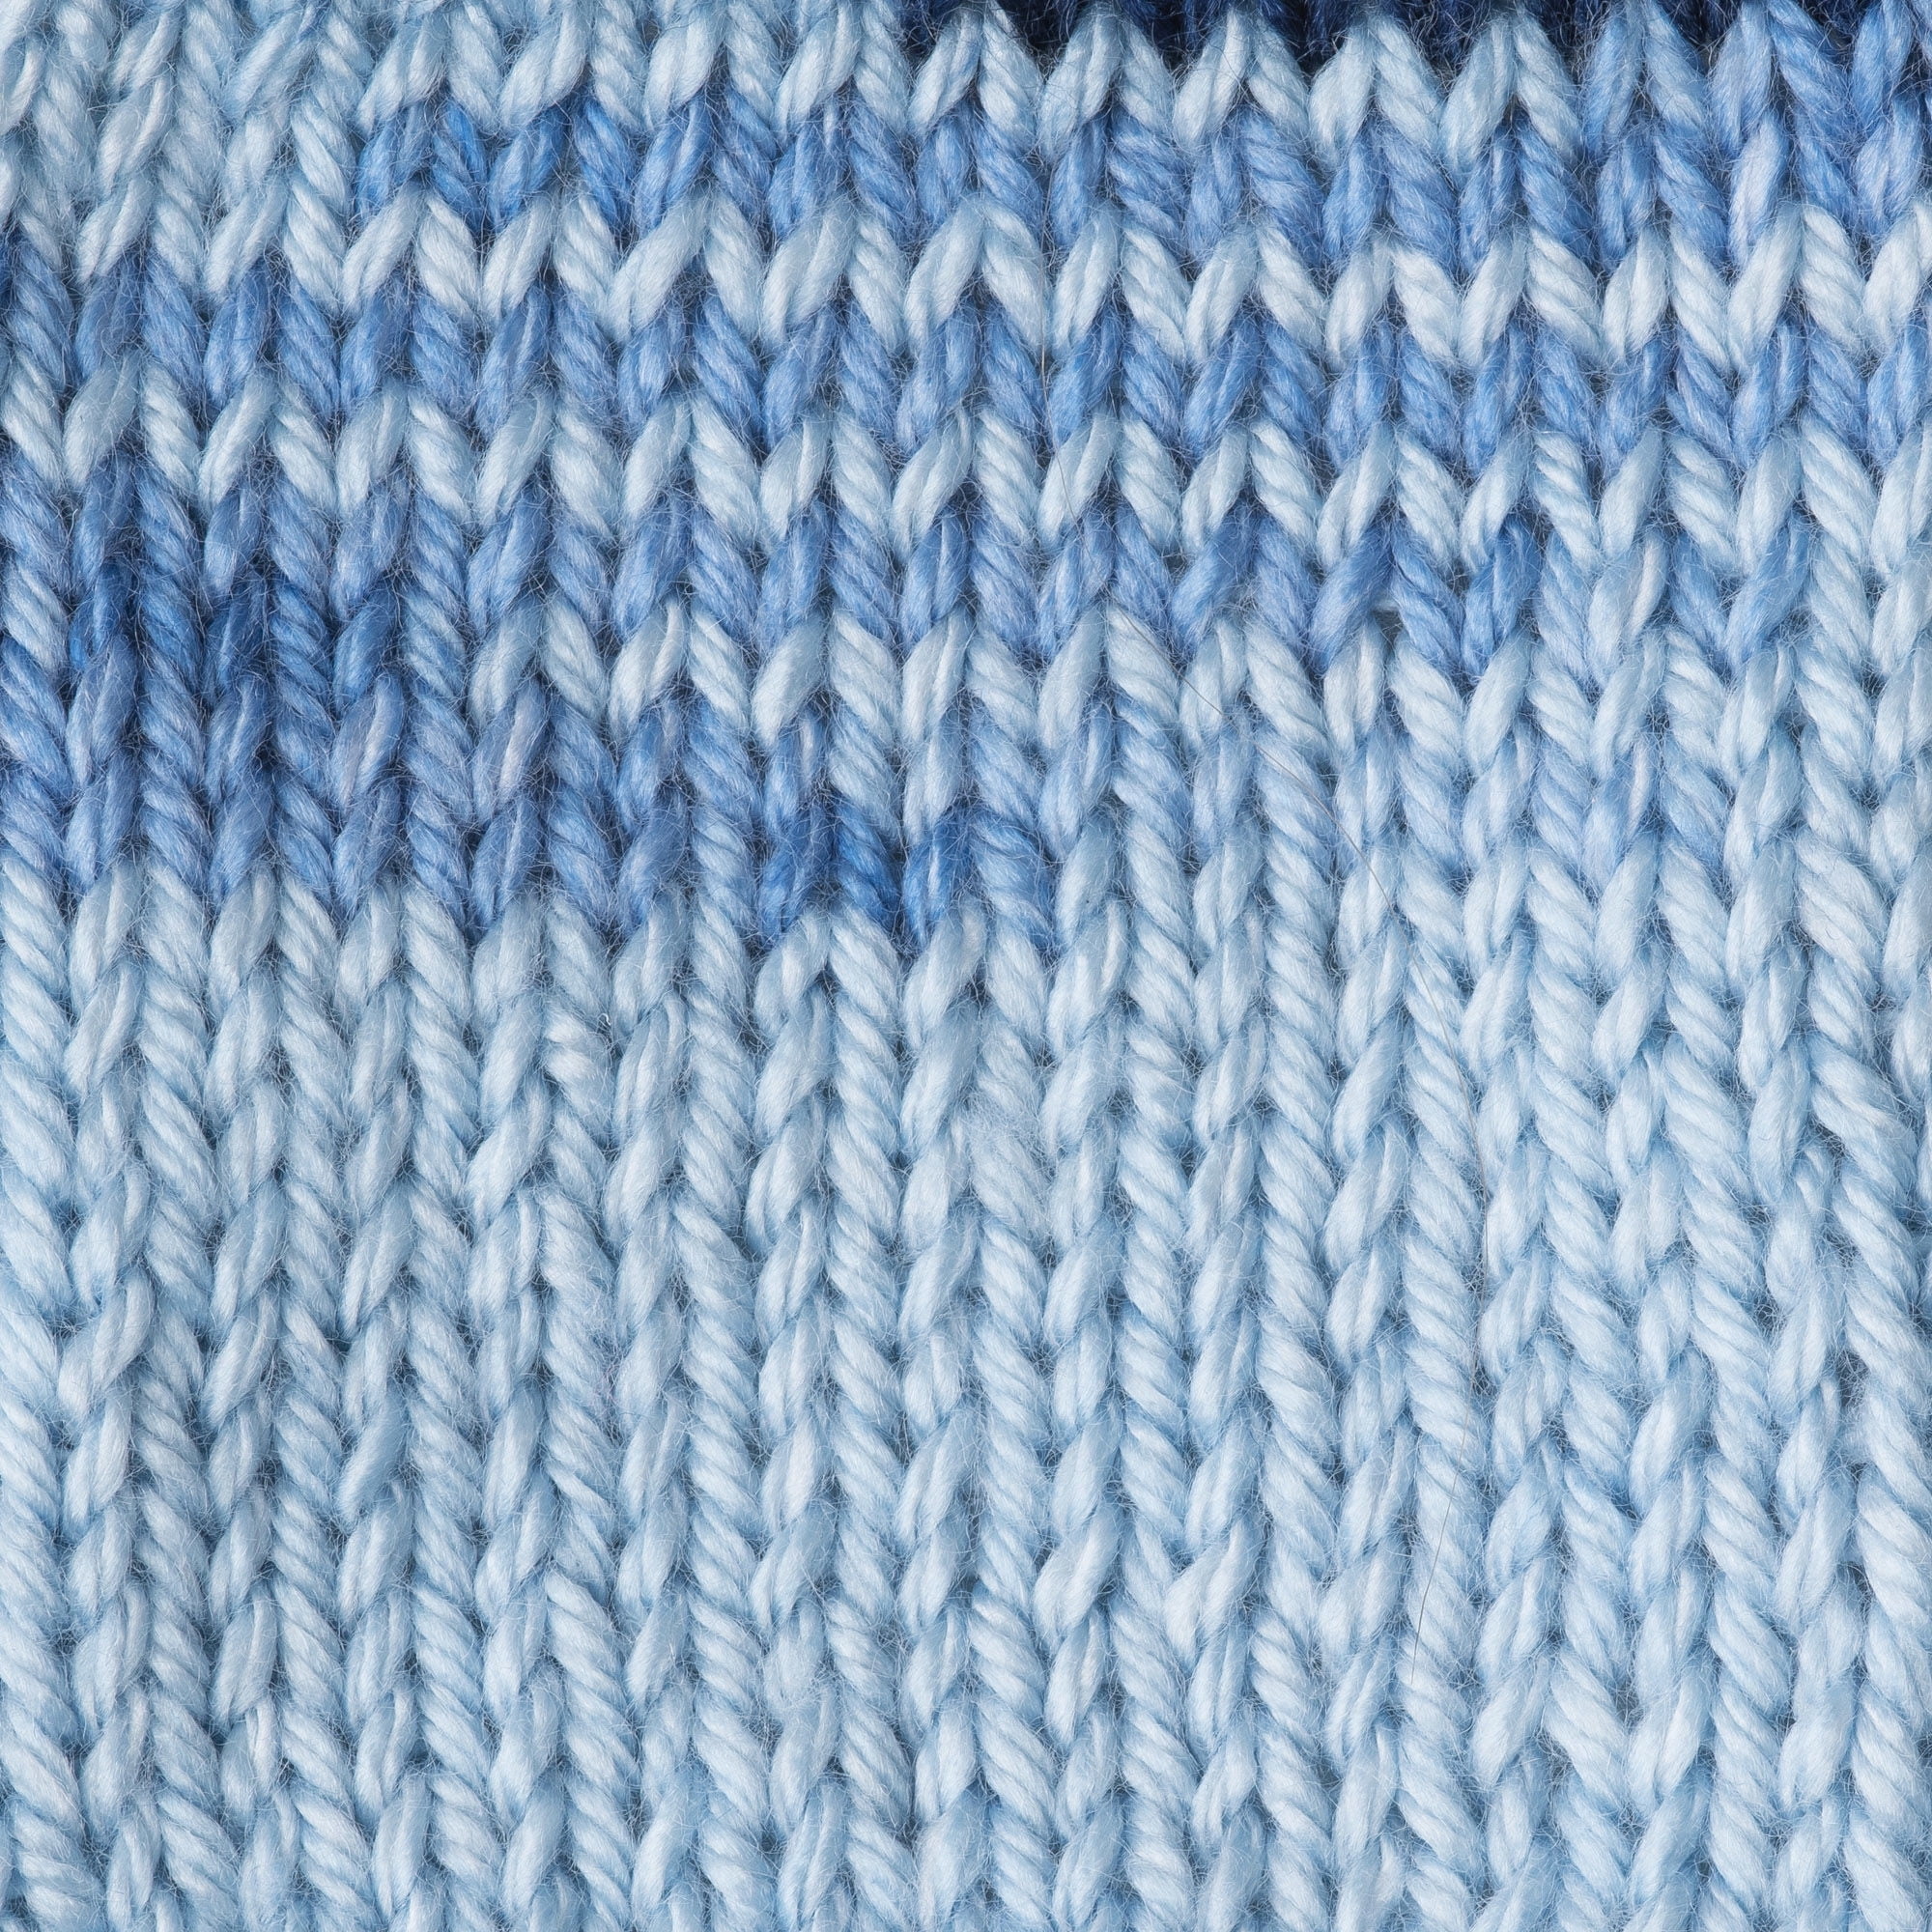 Caron Simply Soft Speckle Yarn-Blue Gingham, 1 count - City Market